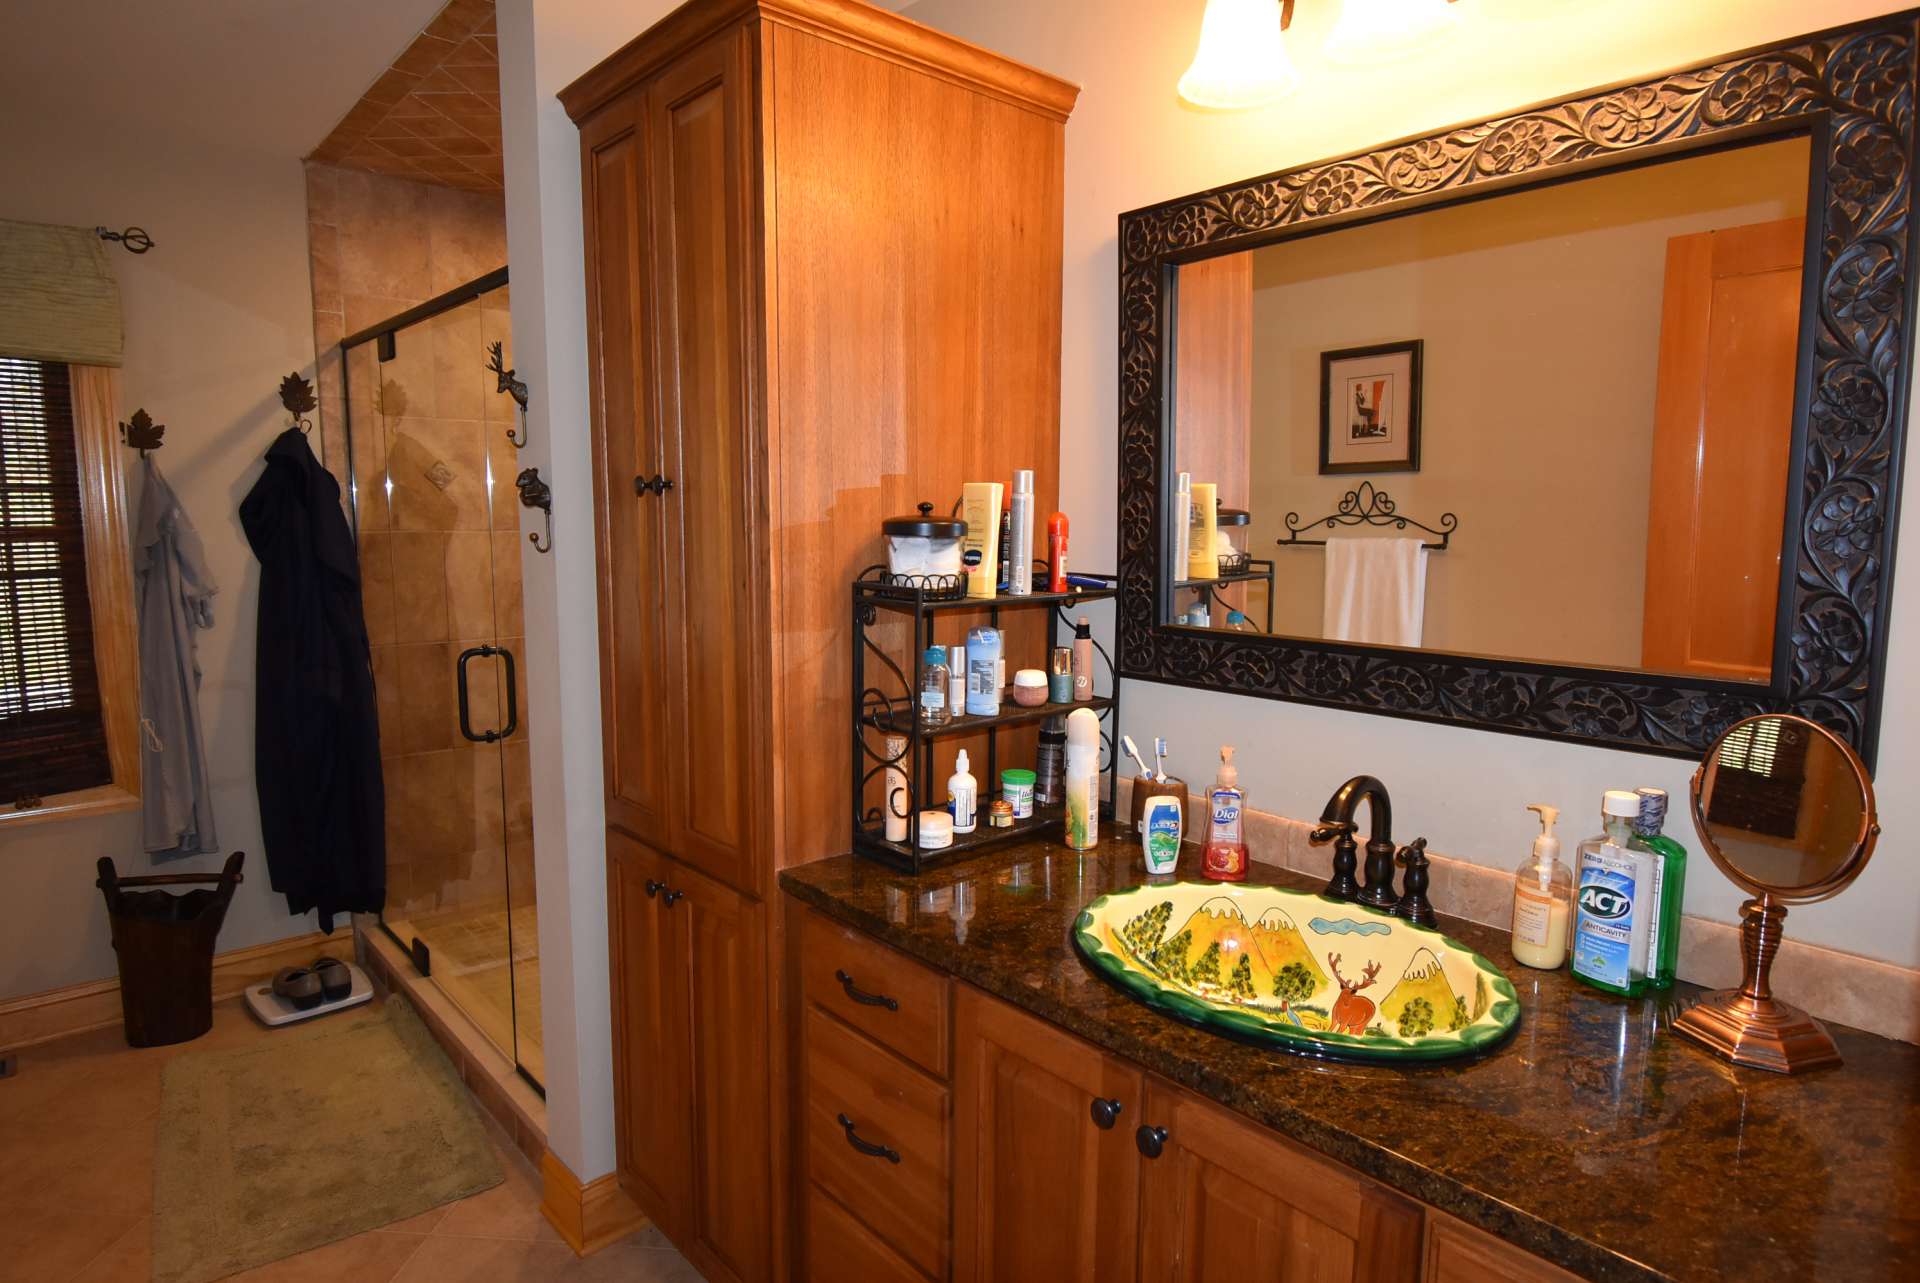 You will appreciate the many craftsman details such as the sink here in the master bath, and the walk-in tiled shower.